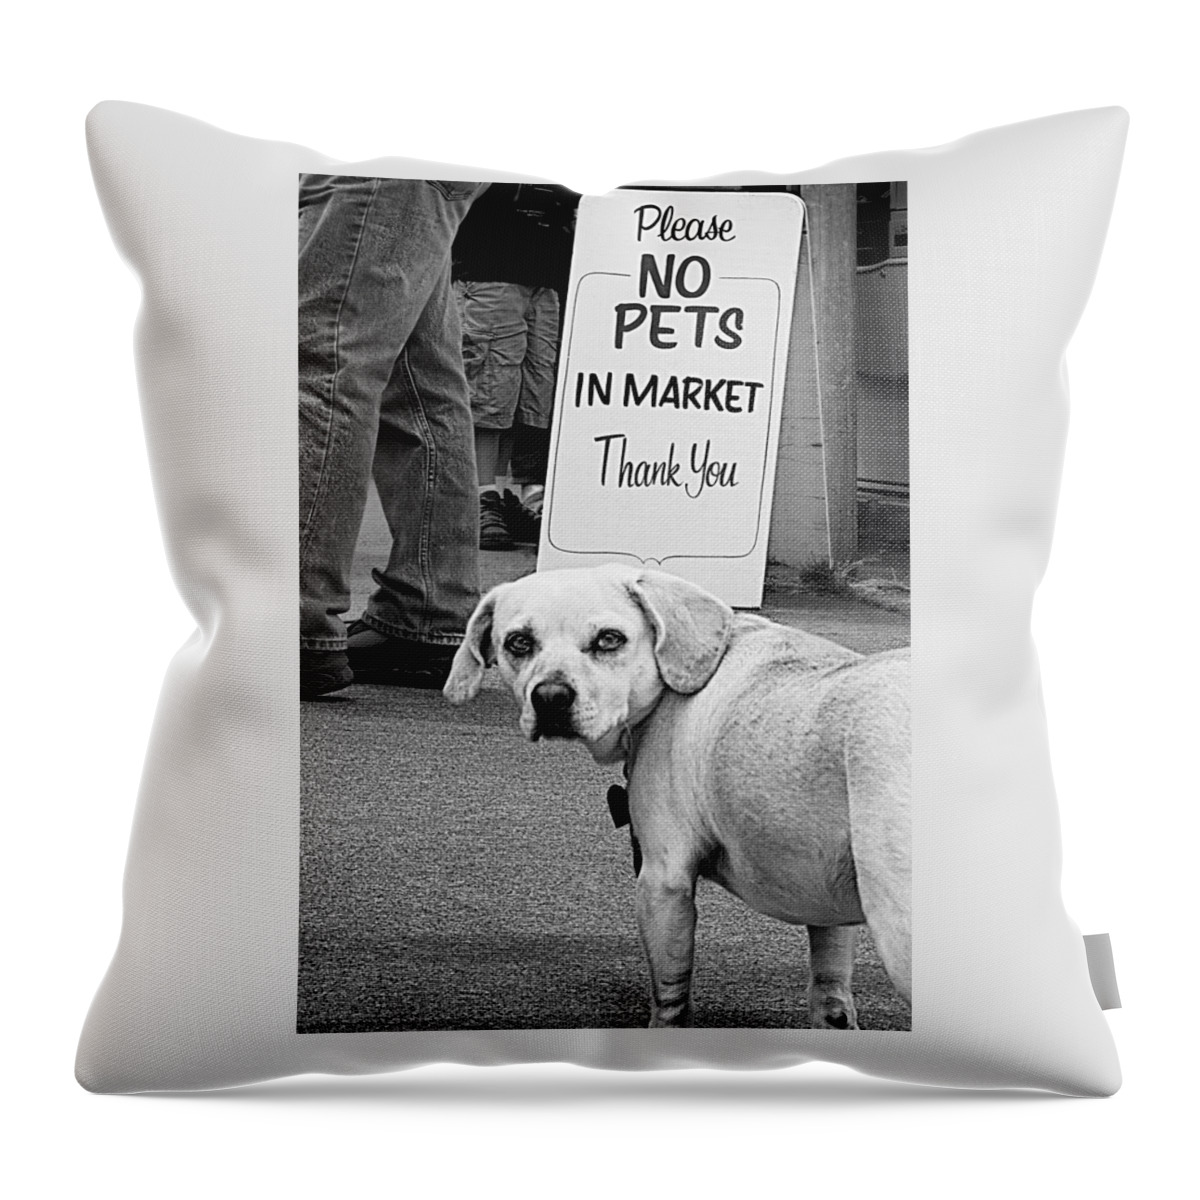 Dog Throw Pillow featuring the photograph Please No Pets in Market by Mitch Spence